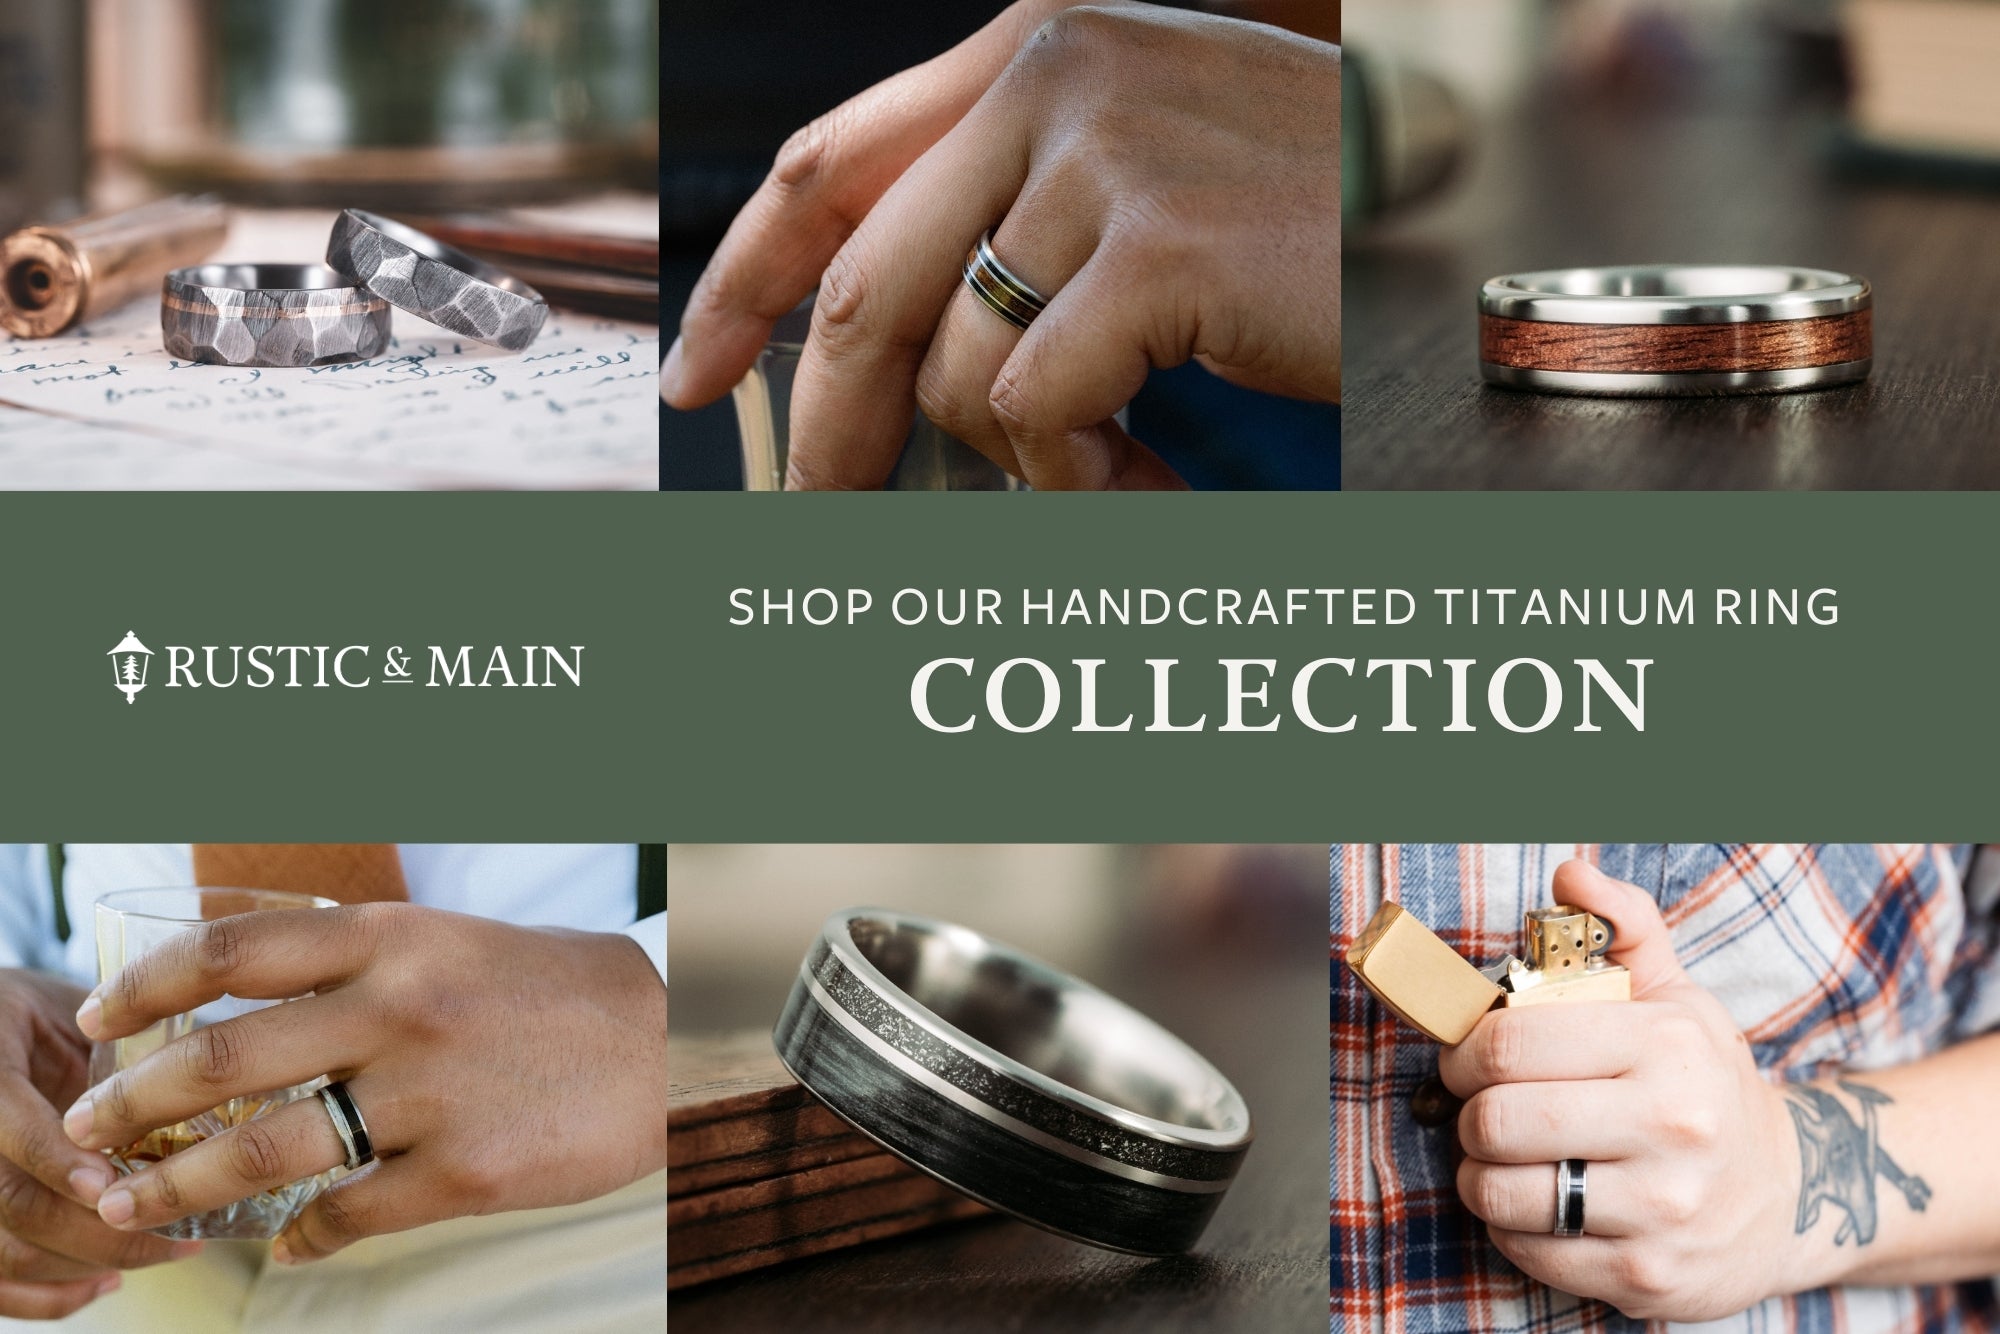 titanium-ring-collection-titanium-vs-tungsten-rings-which-is-right-for-you-blog-rustic-and-main